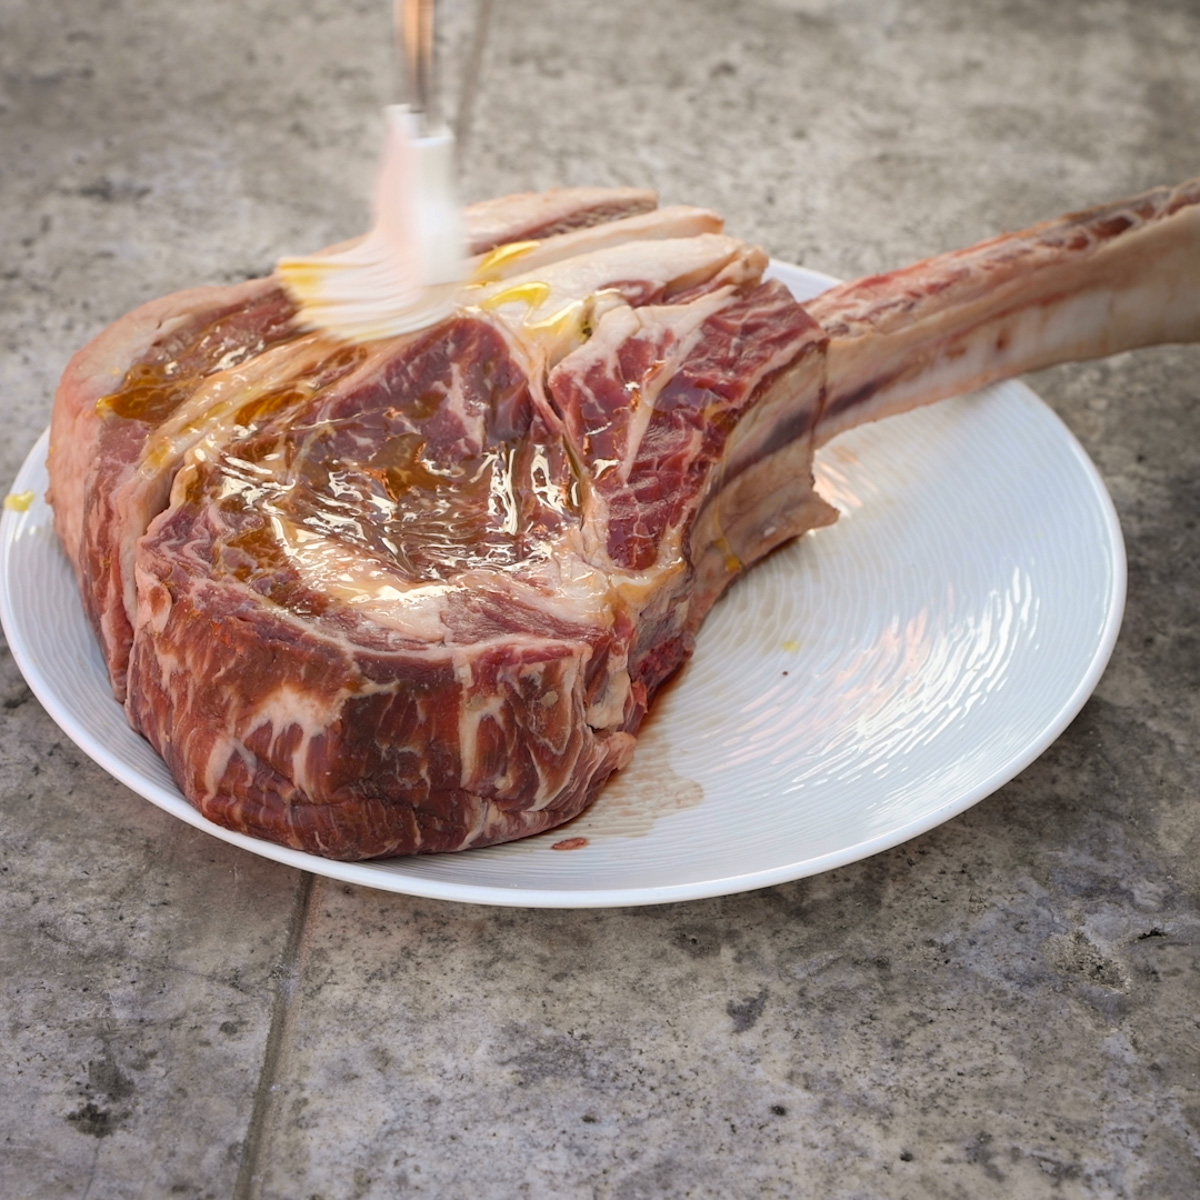 Brush the tomahawk steak with oil